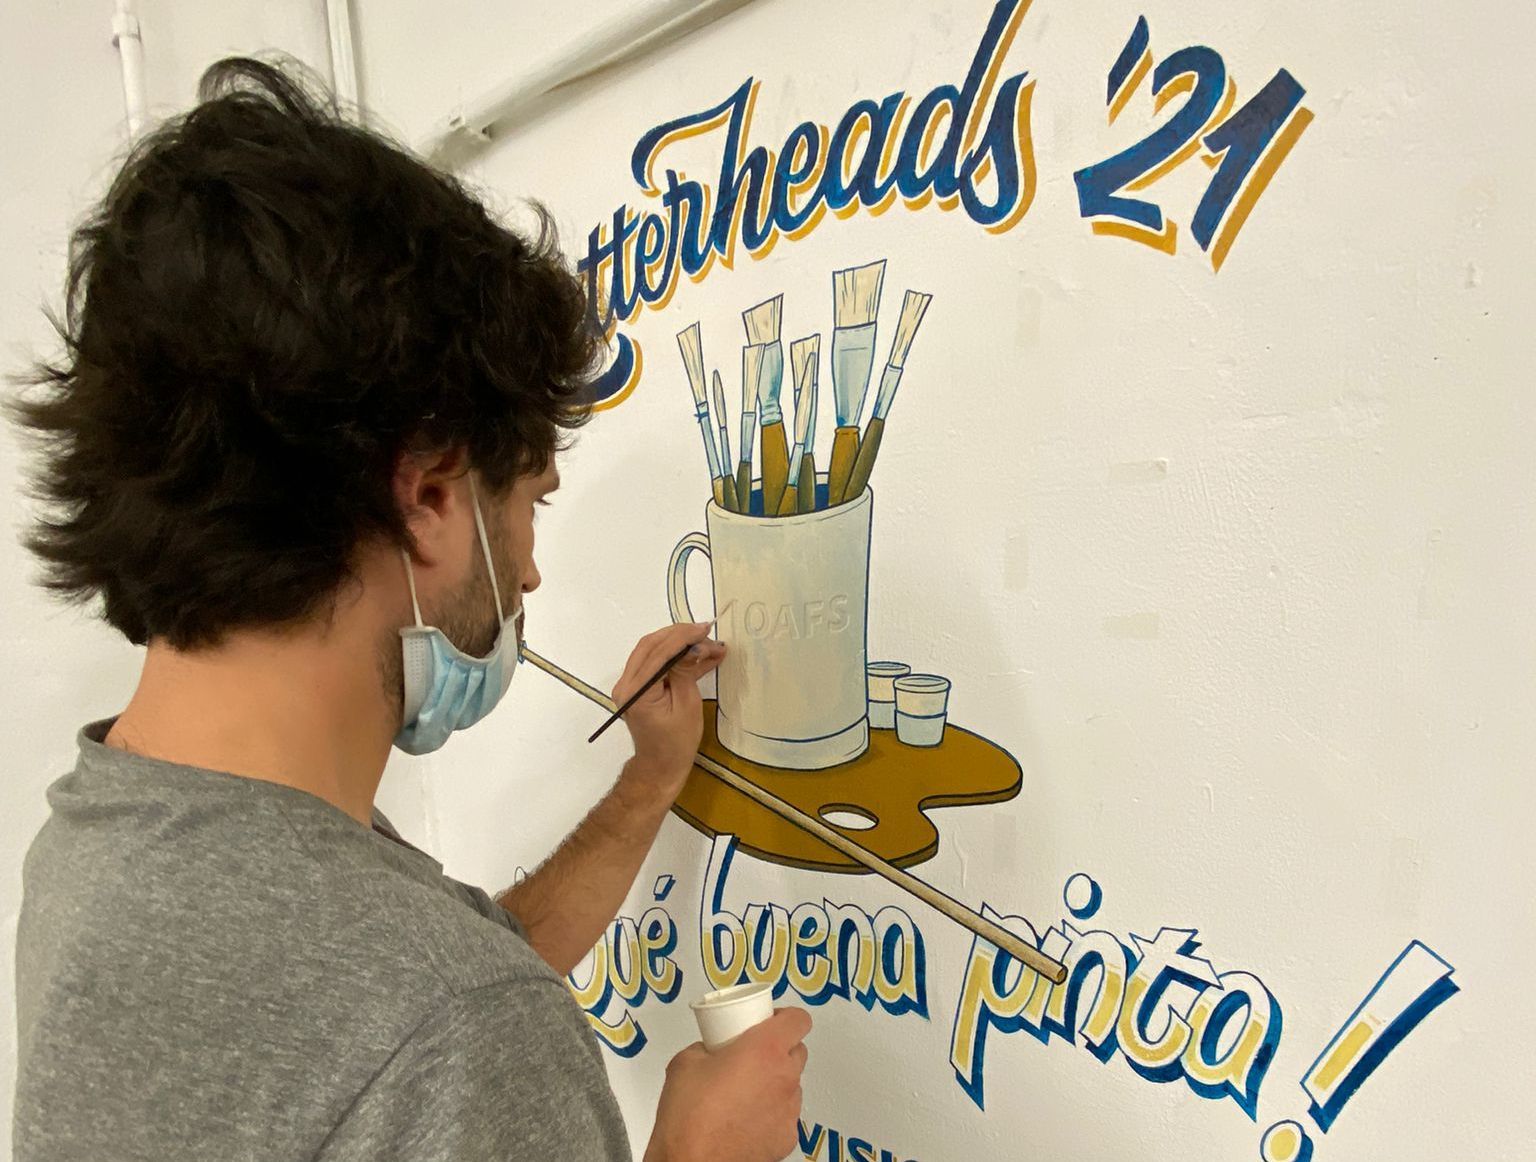 Panels, Paints and Pints at Barcelona Letterheads